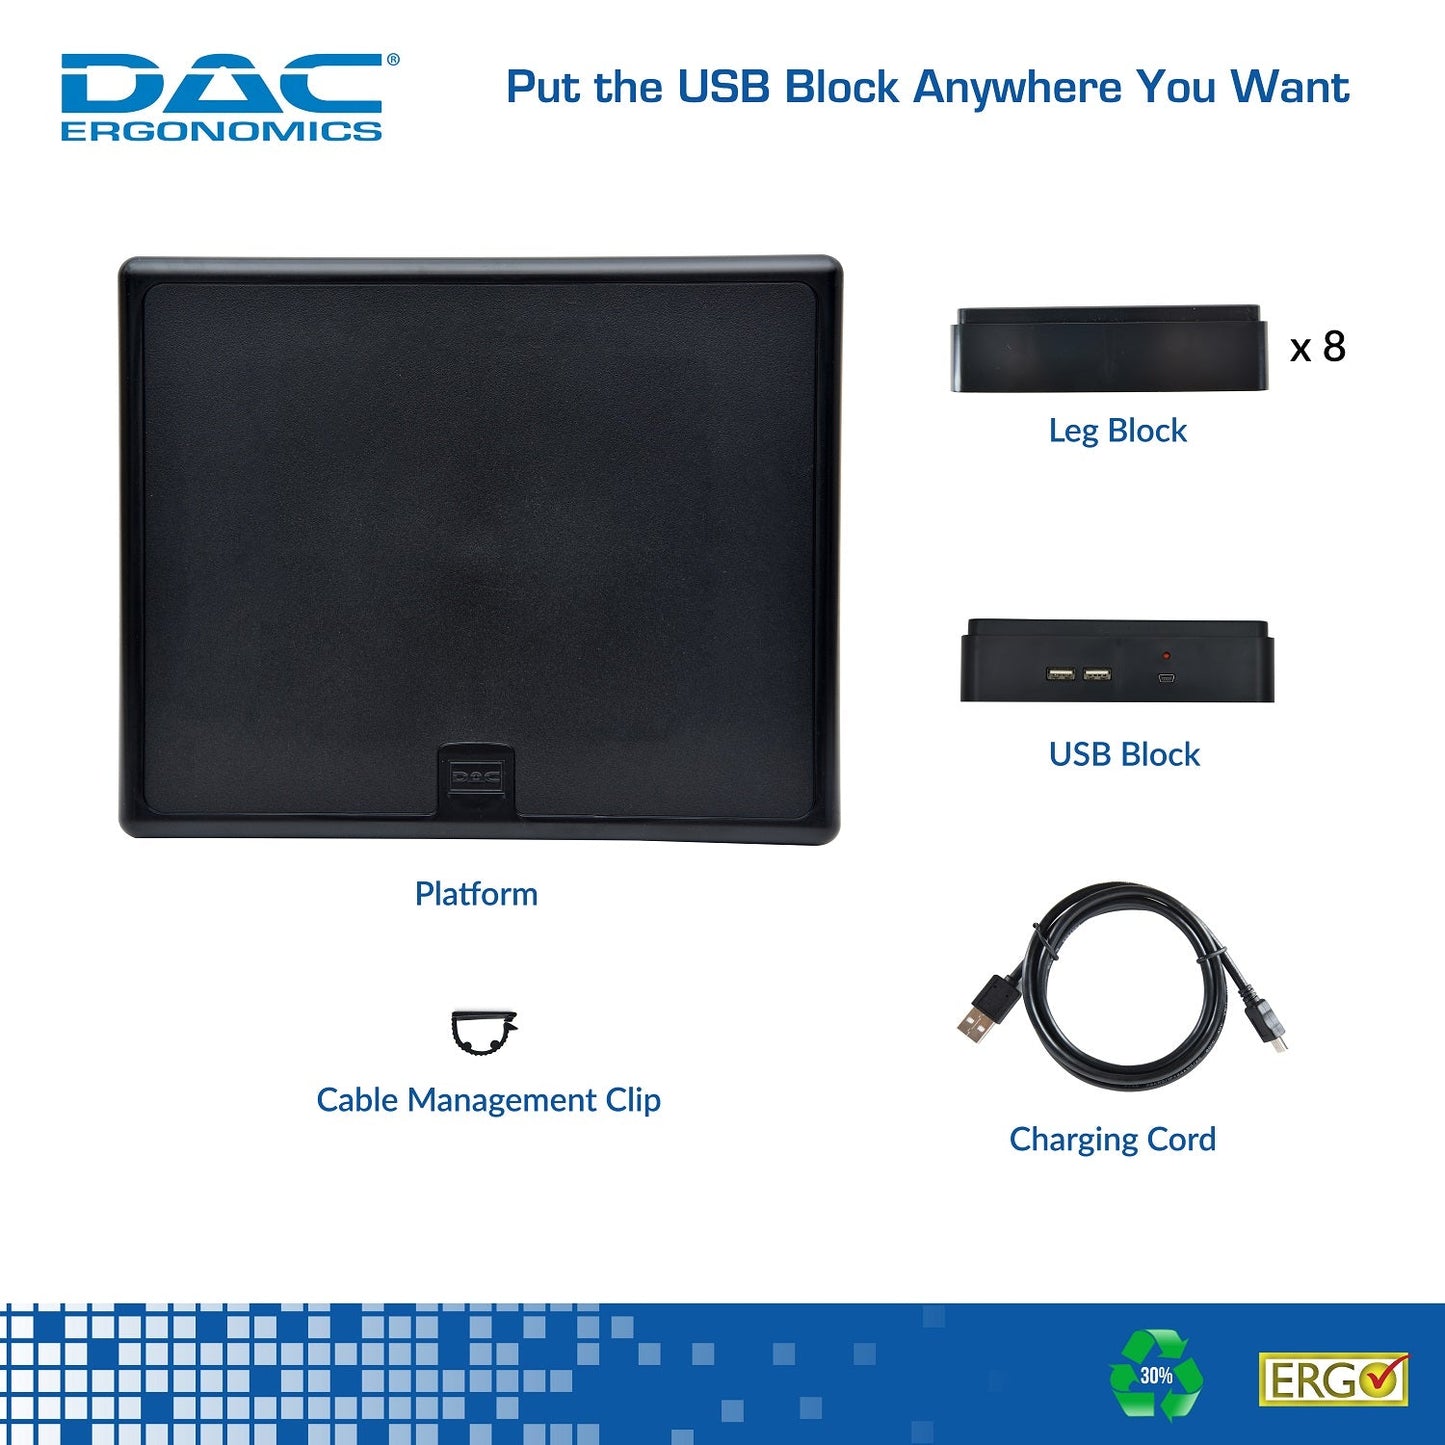 DAC® Stax™ MP-213 Height-Adjustable Monitor/Laptop Stand with 2-USB Ports, Black